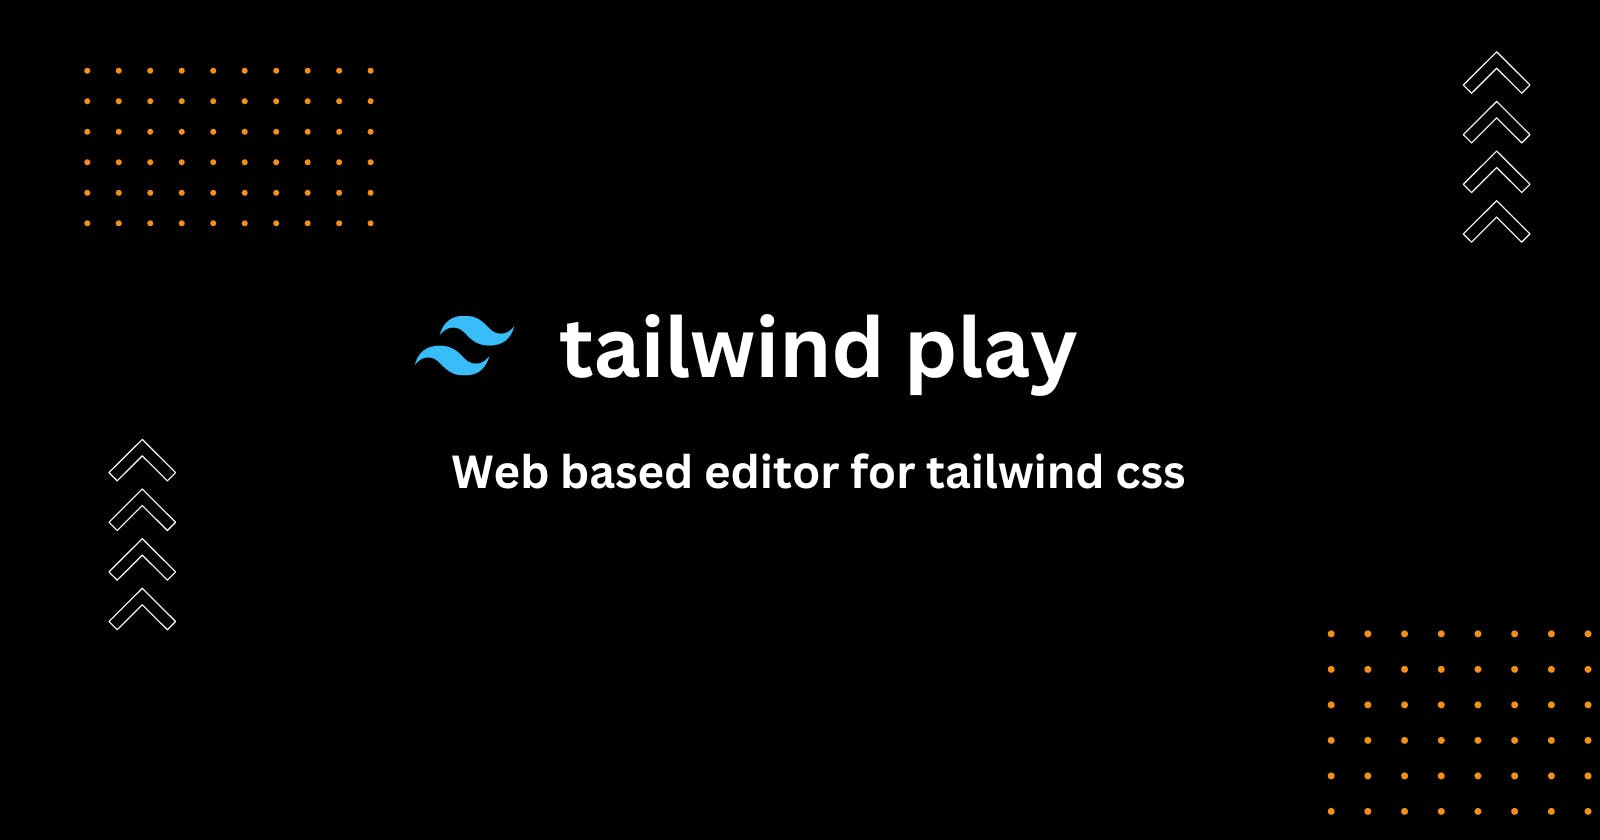 Have you used the new  Tailwind play ?